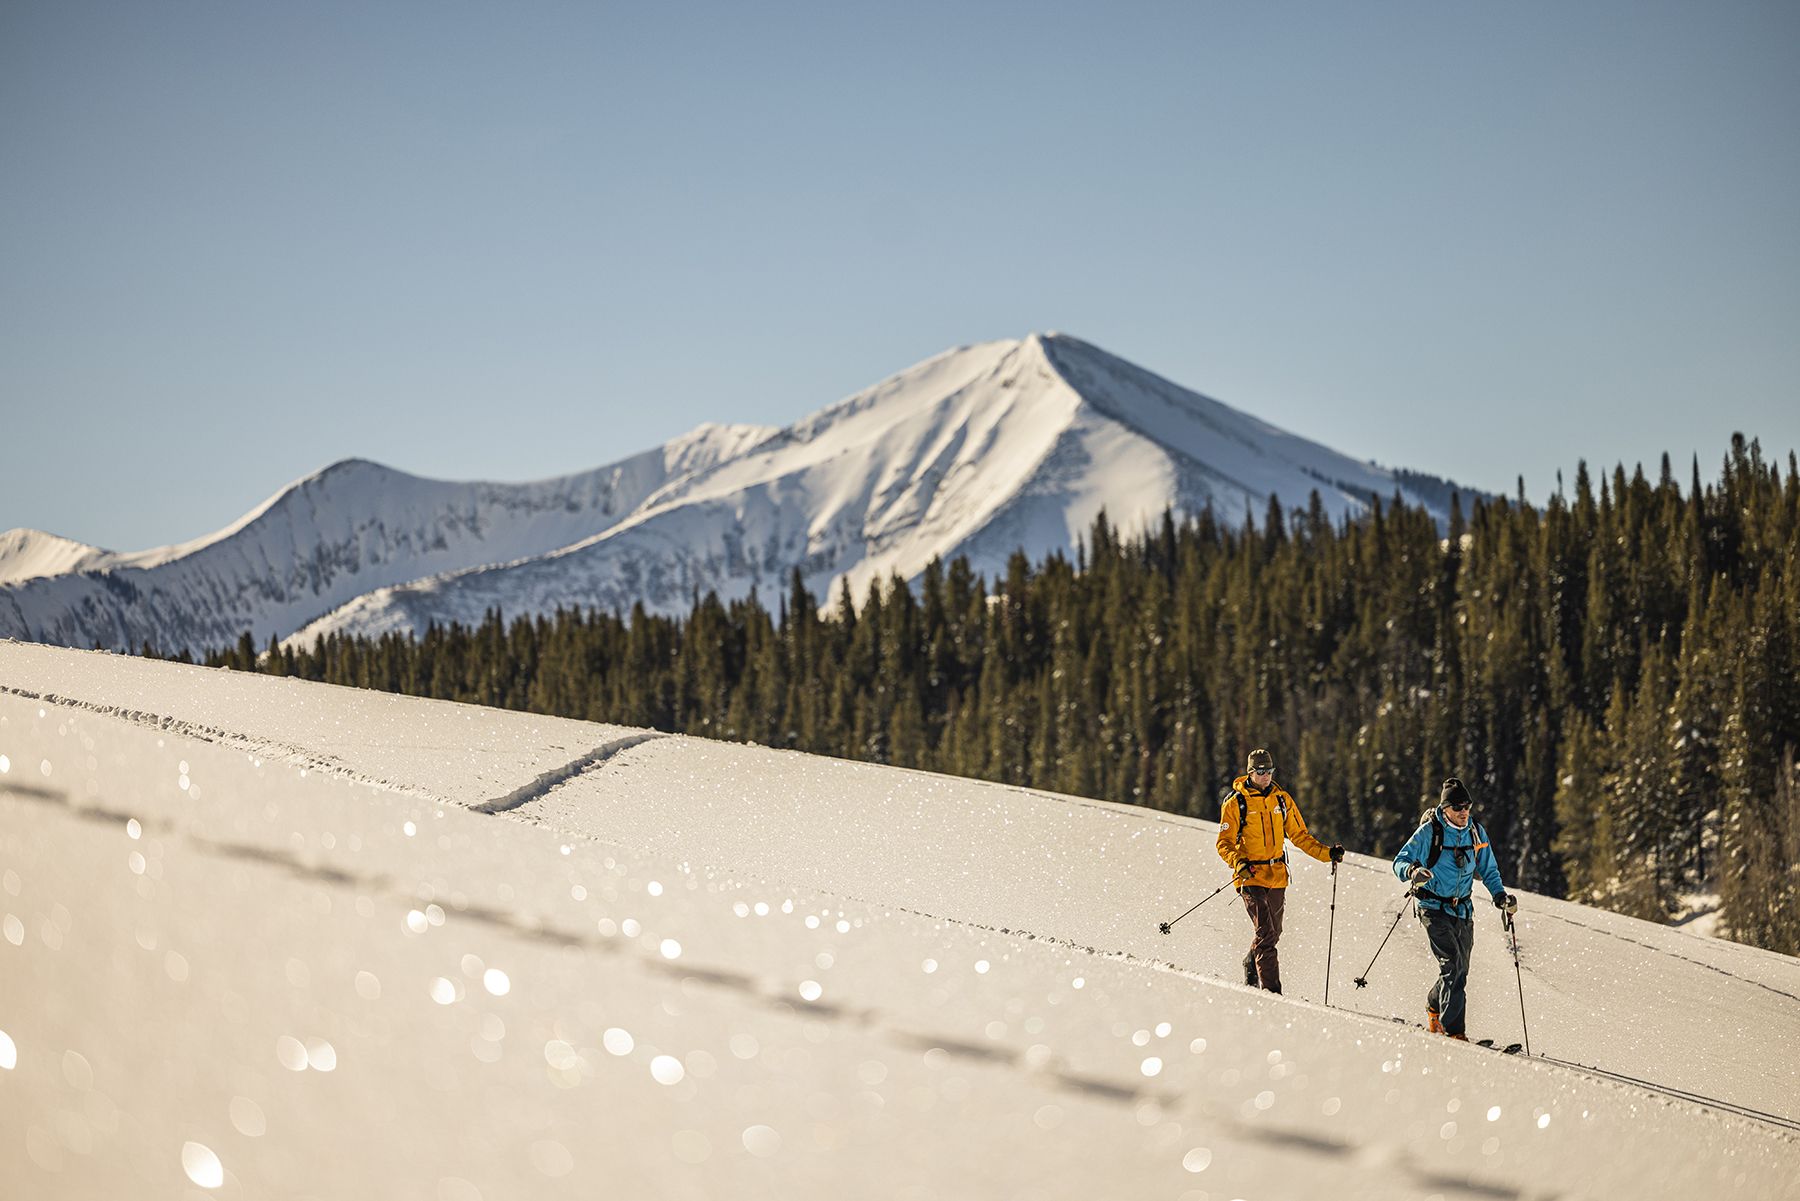 Two backcountry skiers skin up a gentle slope where the snow is covered in sparkly hoar frost. A snow-covered peak towers in the background.